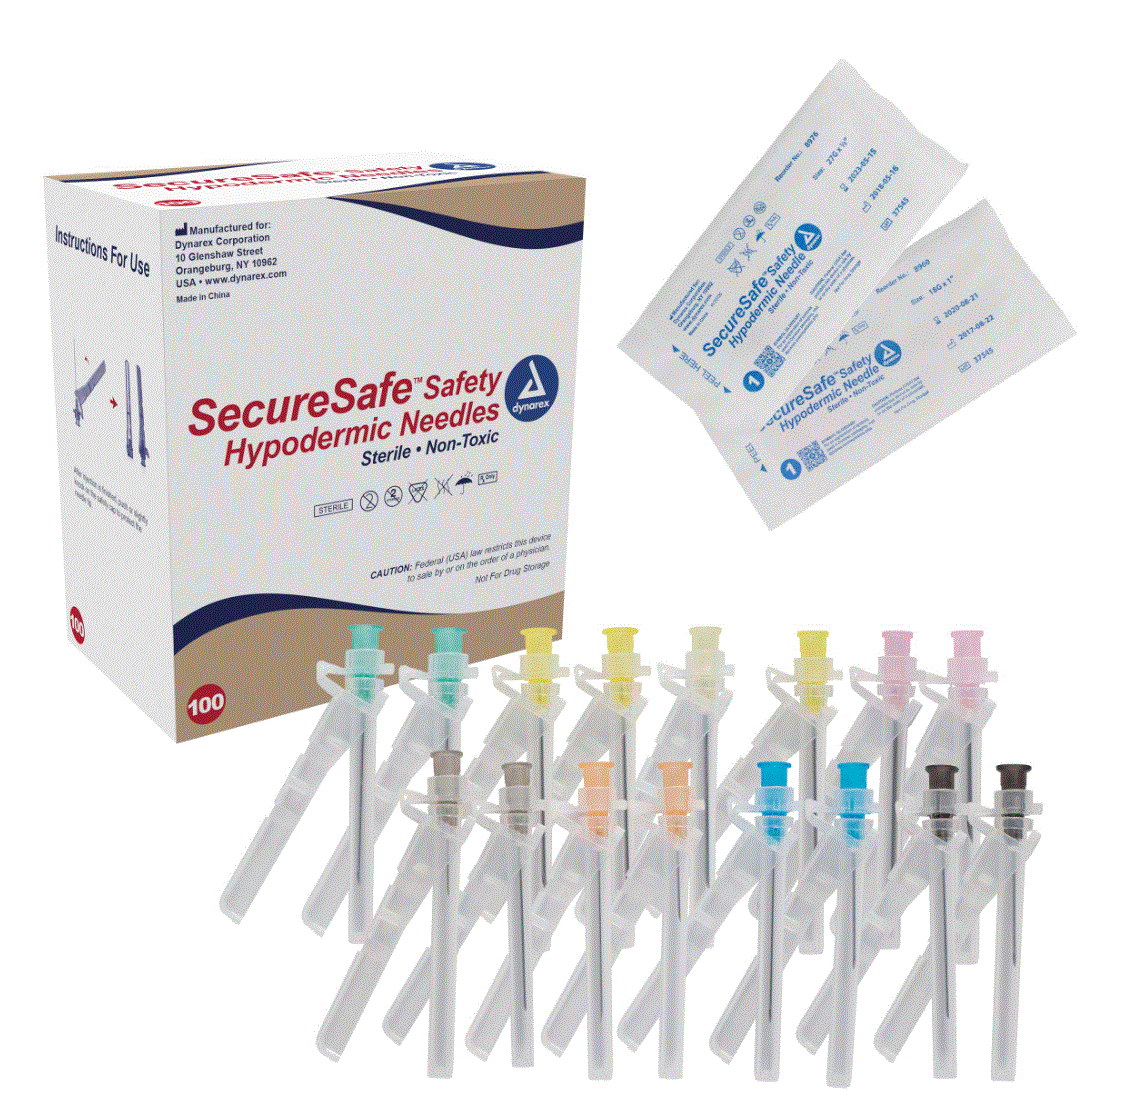 26G Hypodermic Needles Products, Supplies and Equipment